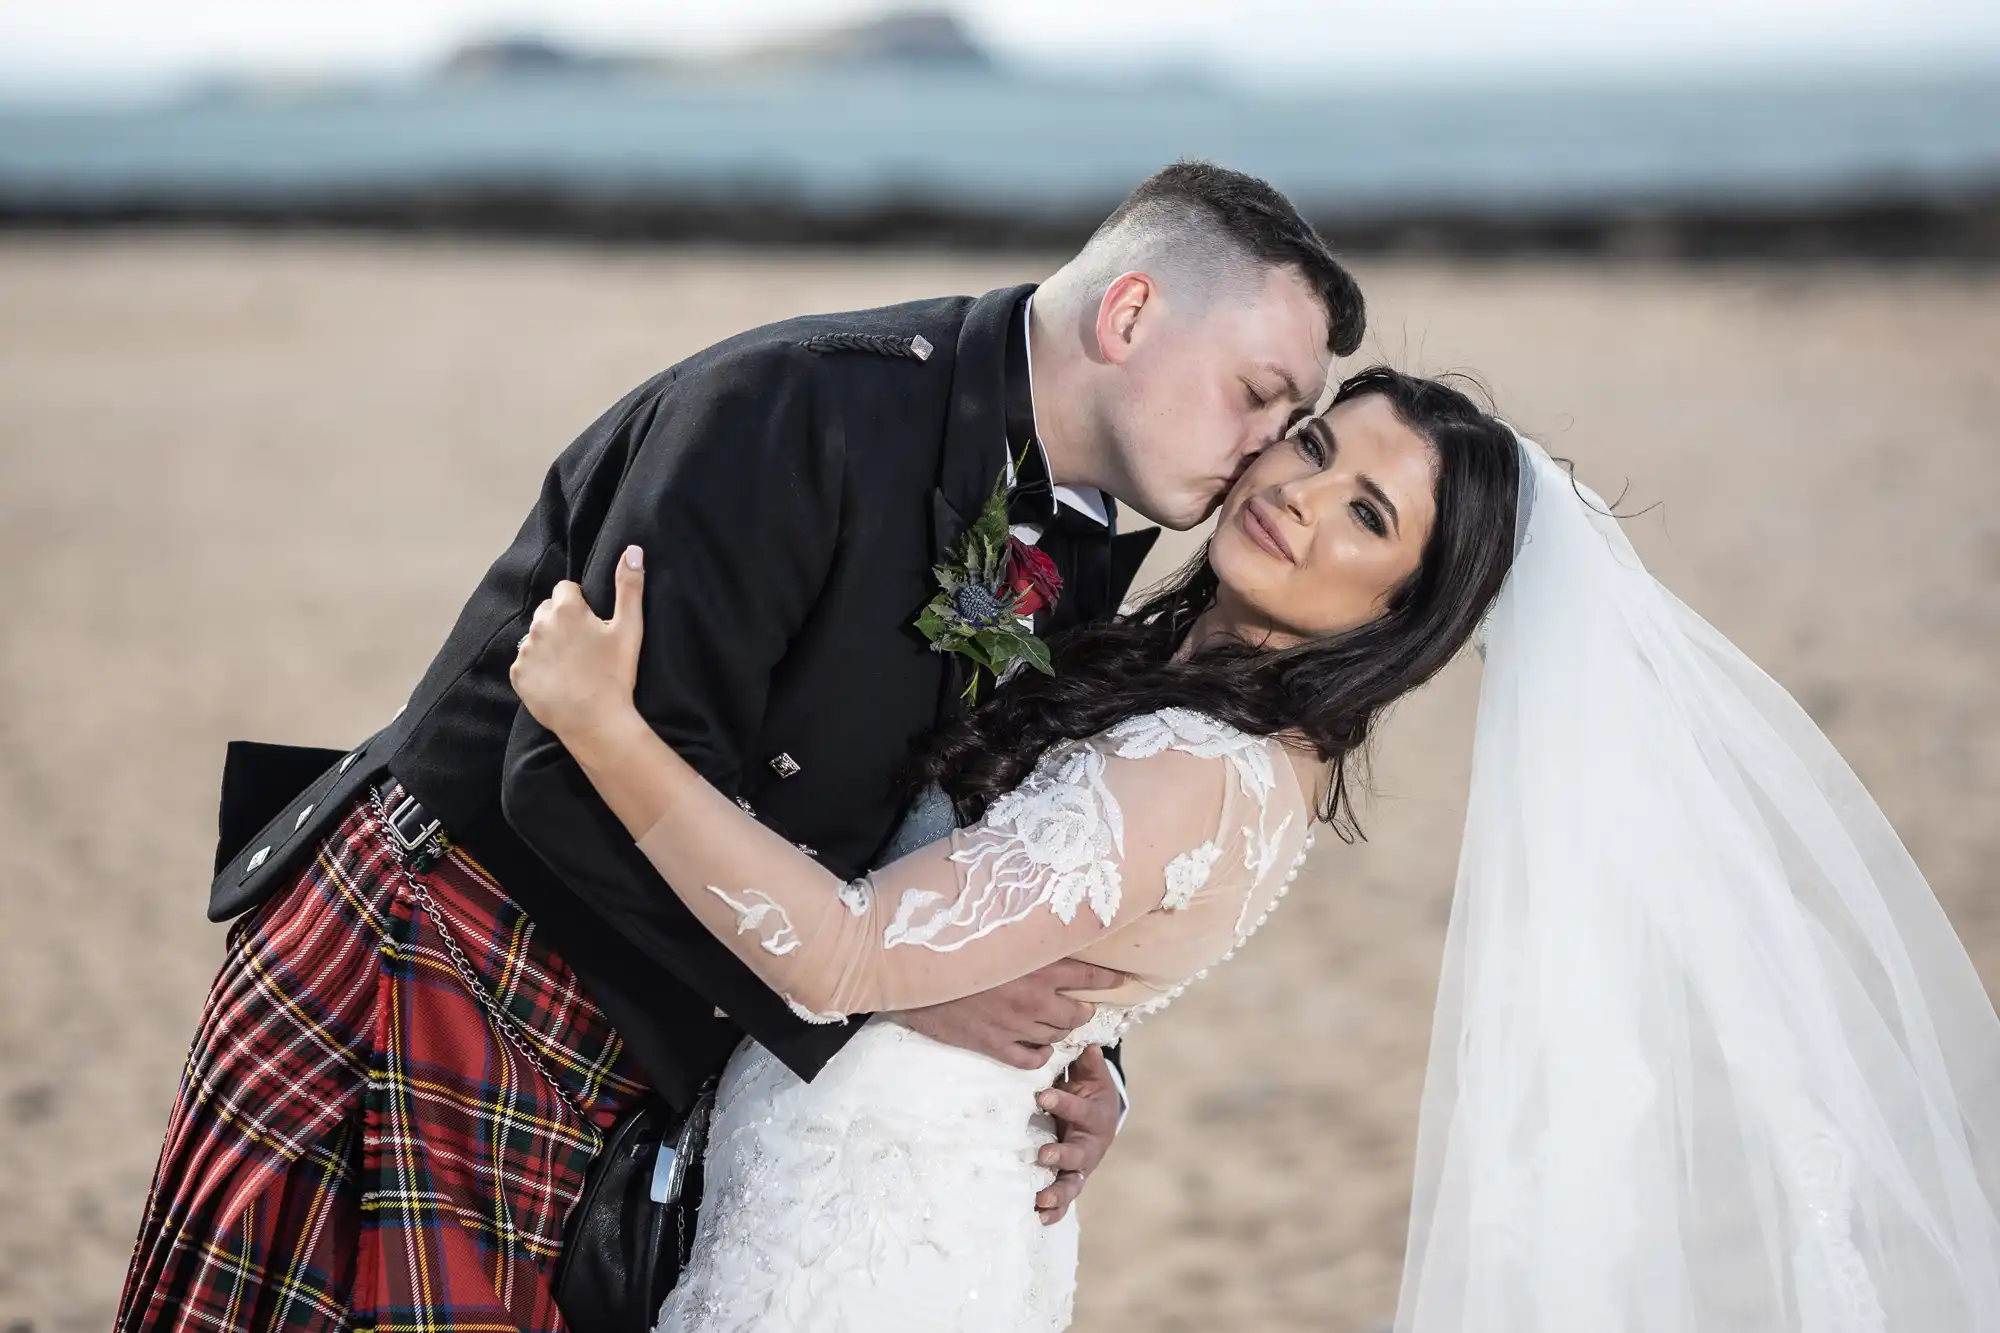 A groom in a kilt kissing a bride in a white lace dress on a beach.